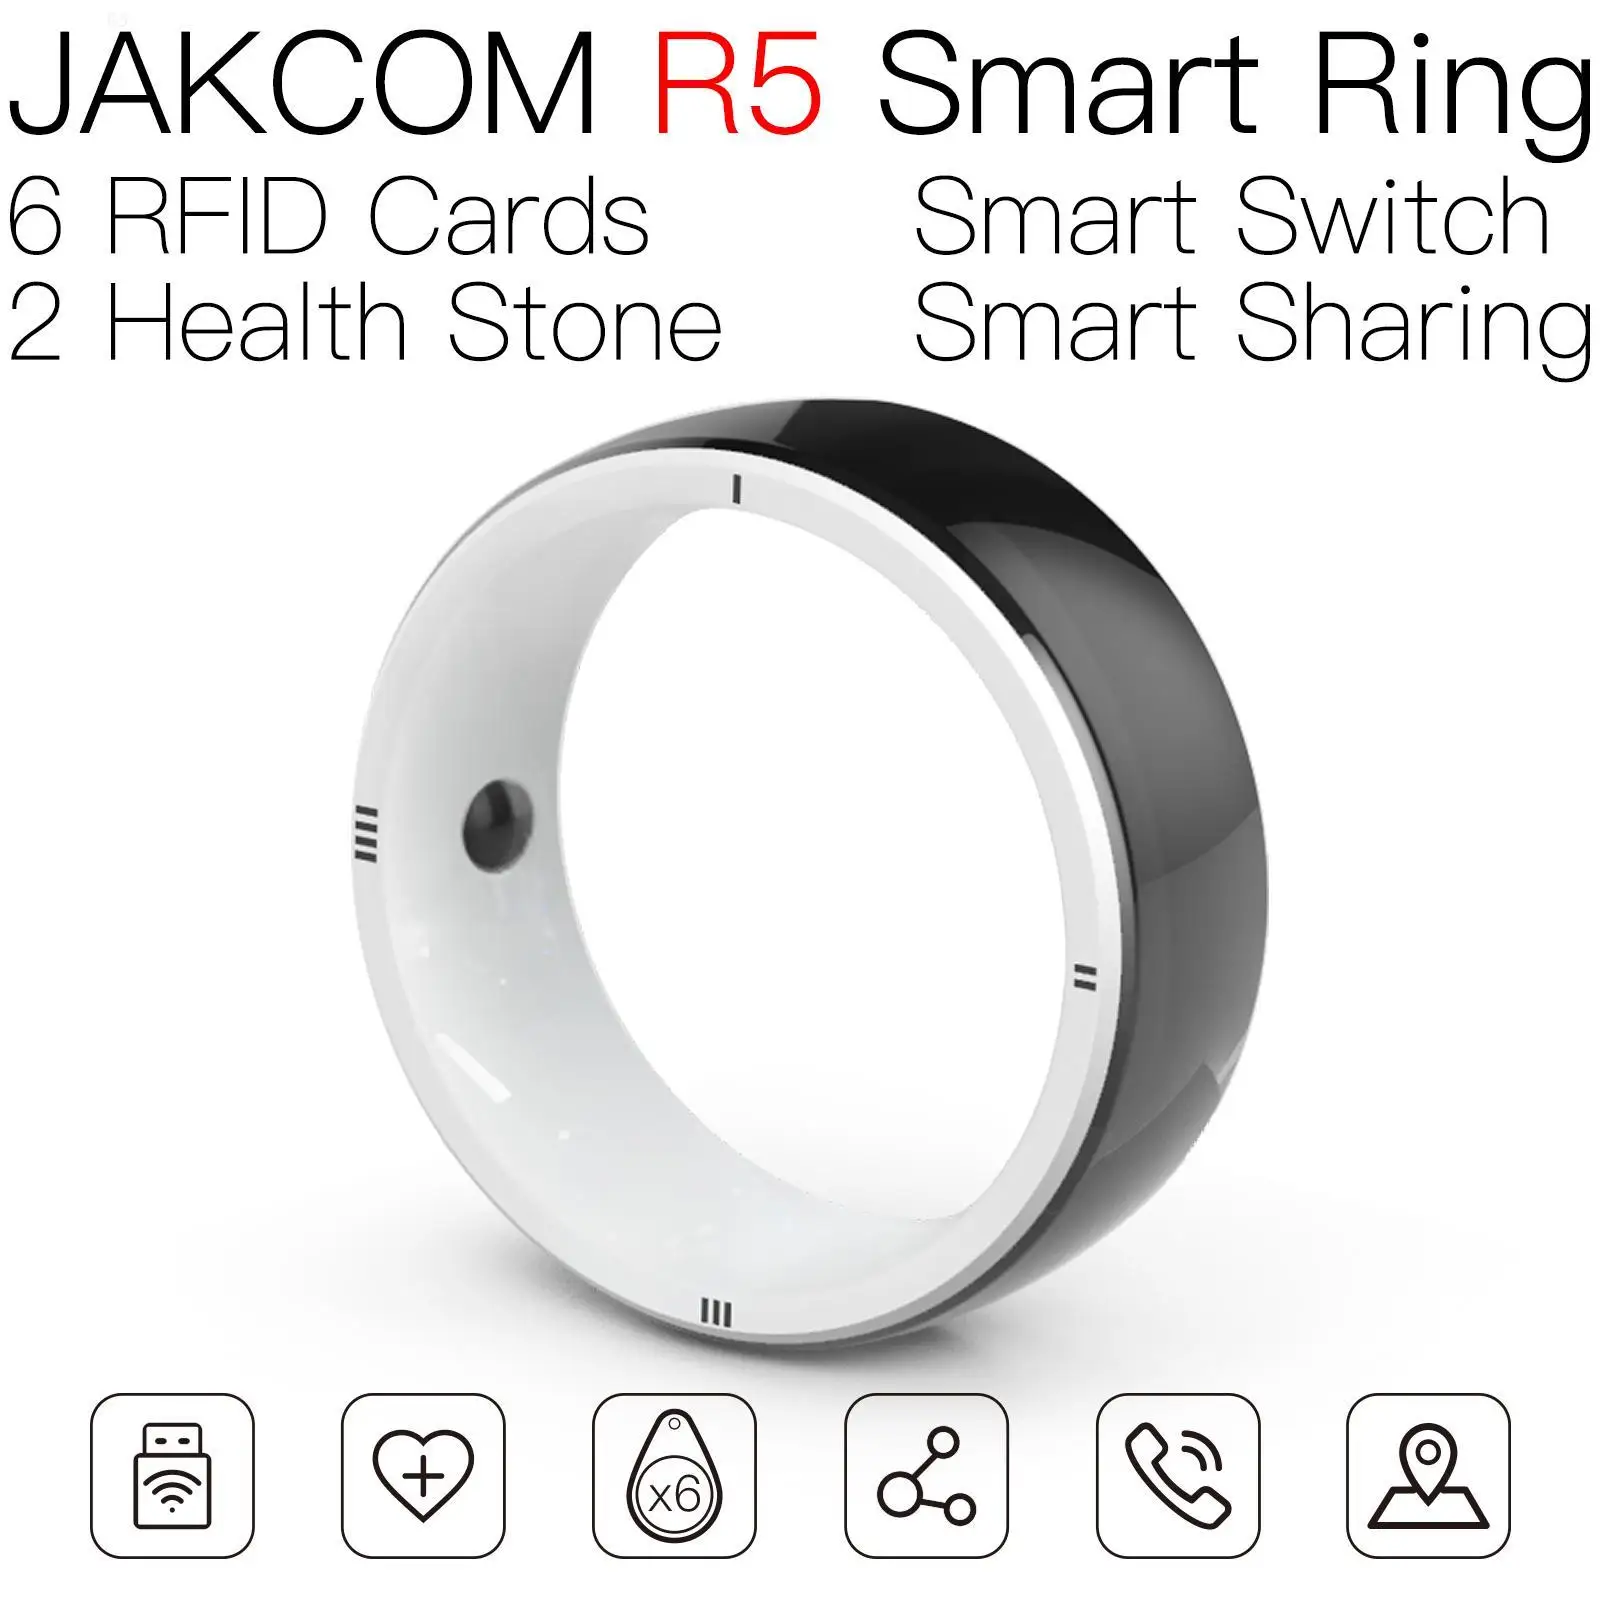 

JAKCOM R5 Smart Ring For men women nfc sniffer copy open lector stickers rfid card key tag pvc uhf panel display beaudiva